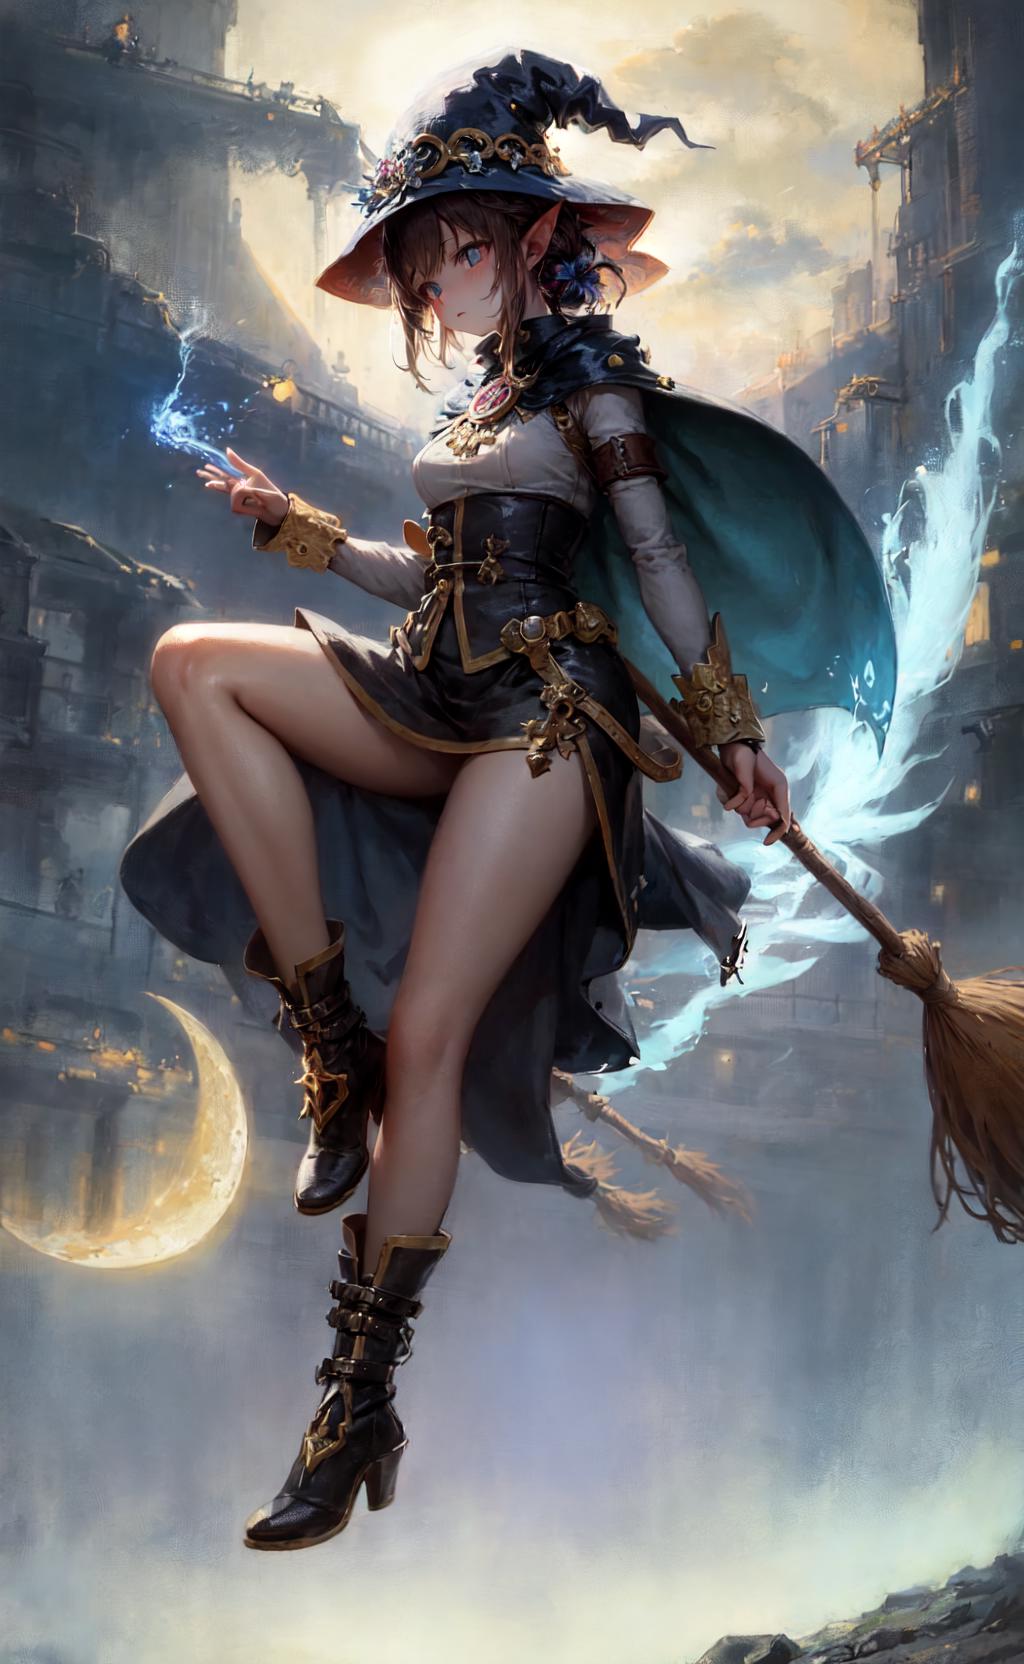 The image features a woman dressed in a medieval-style outfit, wearing a black dress and holding a wand. She appears to be a witch or a sorceress, with a broom stick in one hand and a wand in the other. The woman is standing on a moon, which adds a mystical and magical element to the scene. She is surrounded by a castle-like background, and the image is rendered in a 3D art style, giving it a very intricate and detailed appearance.